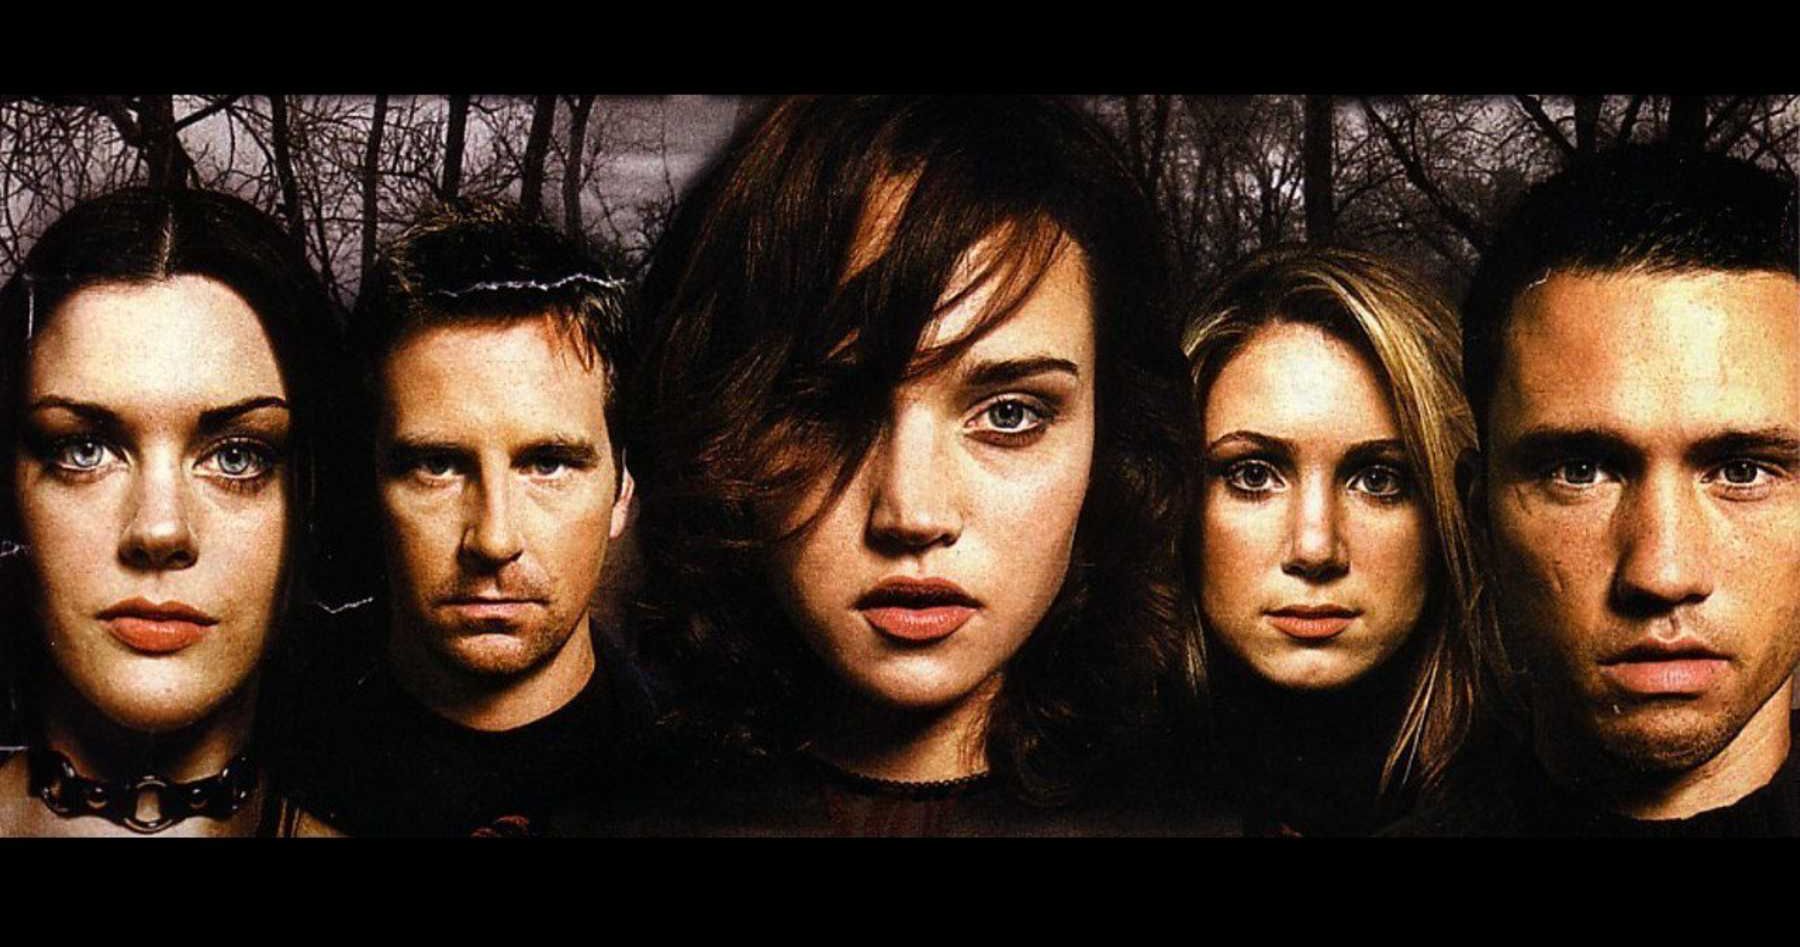 Why Blair Witch 2 Was Doomed to Fail According to Director Joe Berlinger